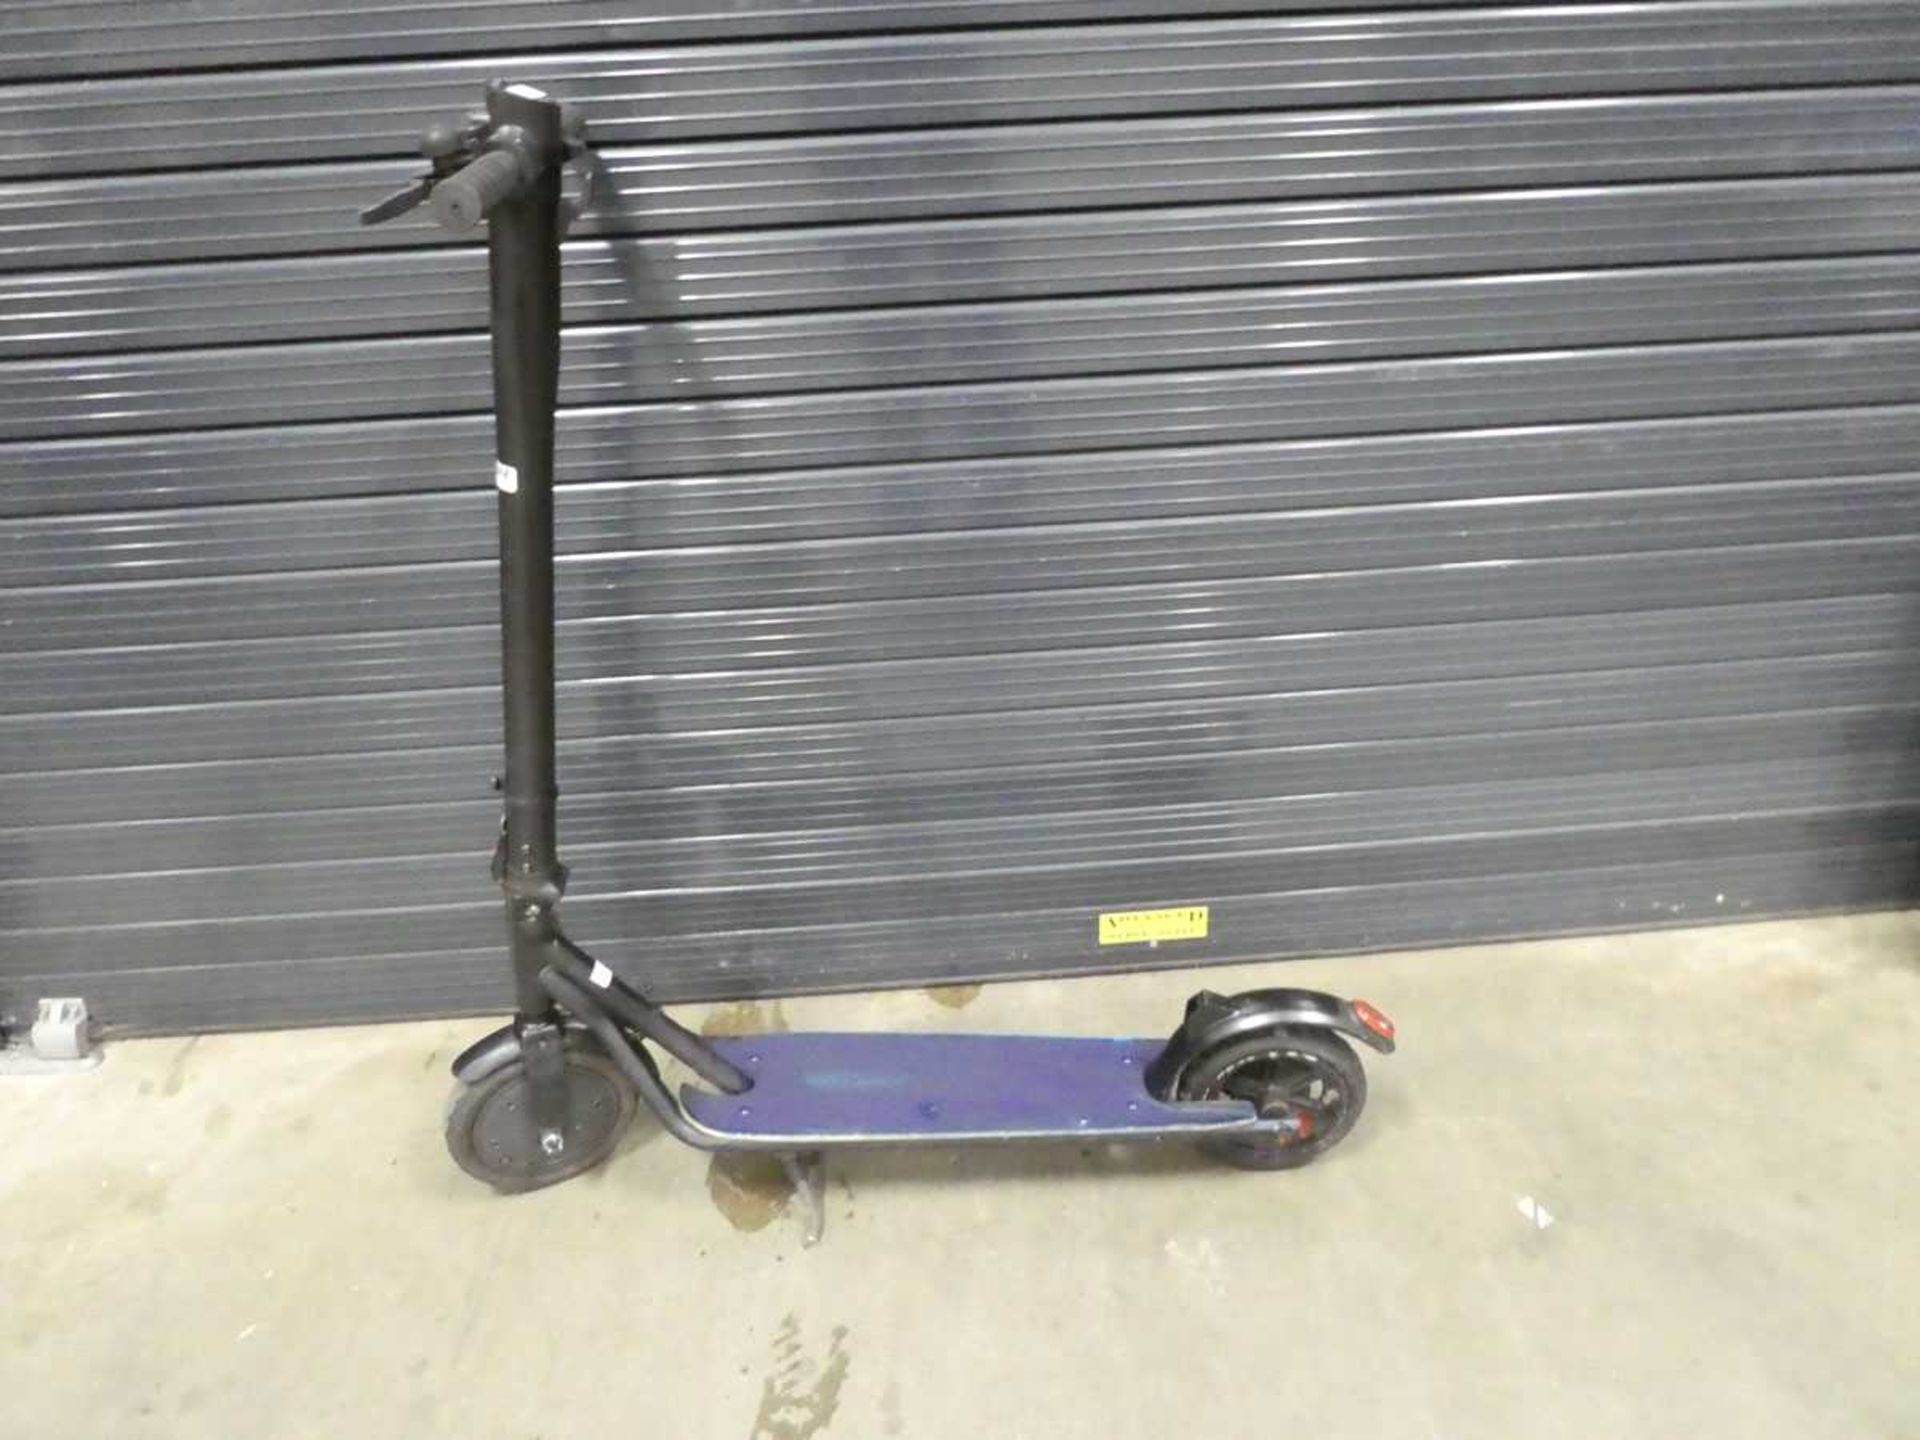 Biron electric scooter, no charger